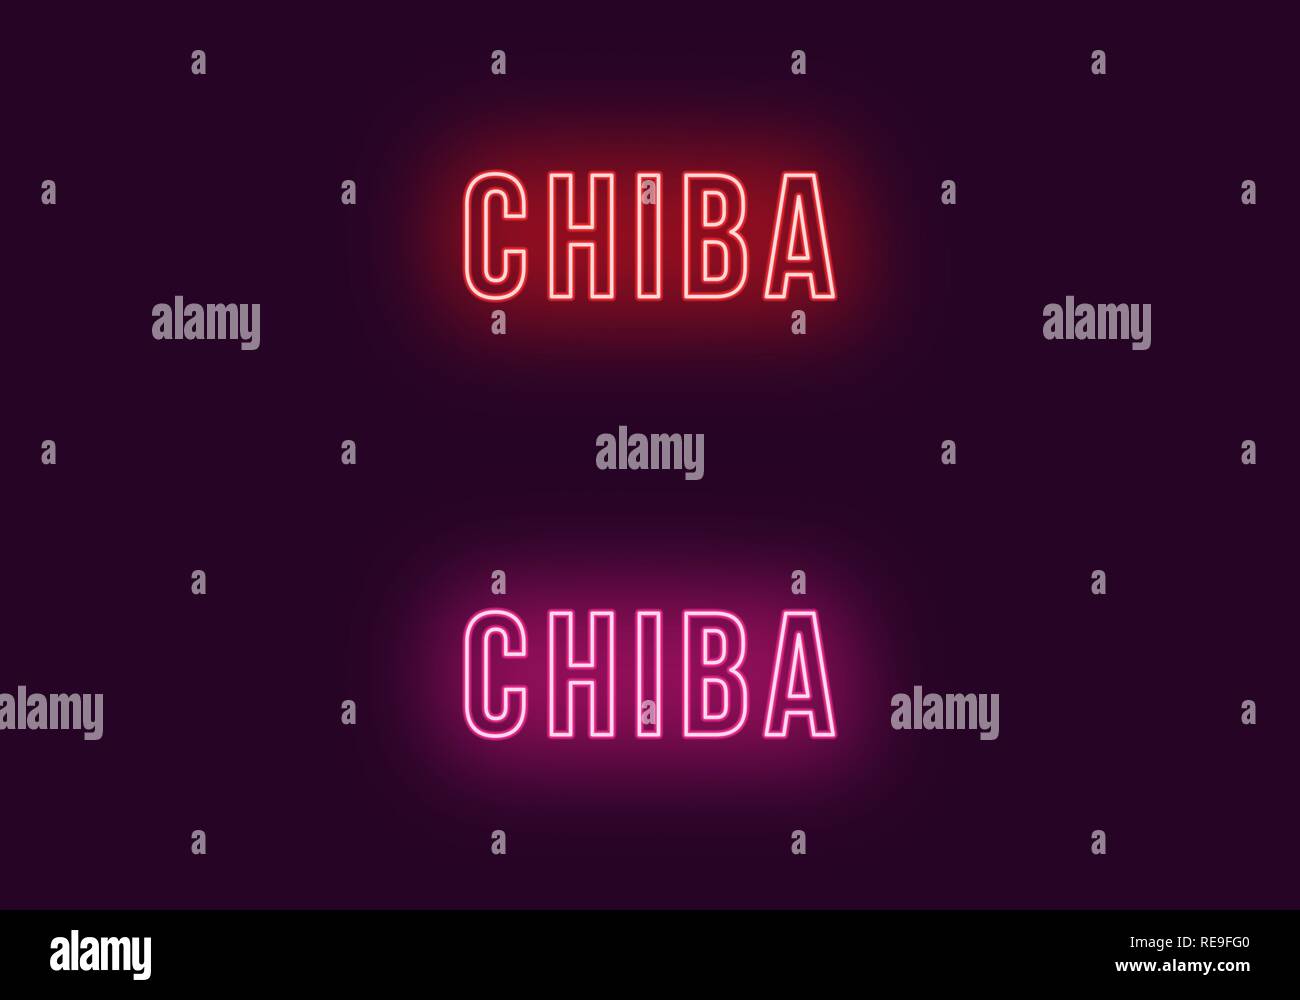 Neon name of Chiba city in Japan. Vector text of Chiba, Neon inscription with backlight in Bold style, red and pink colors. Isolated glowing title for Stock Vector